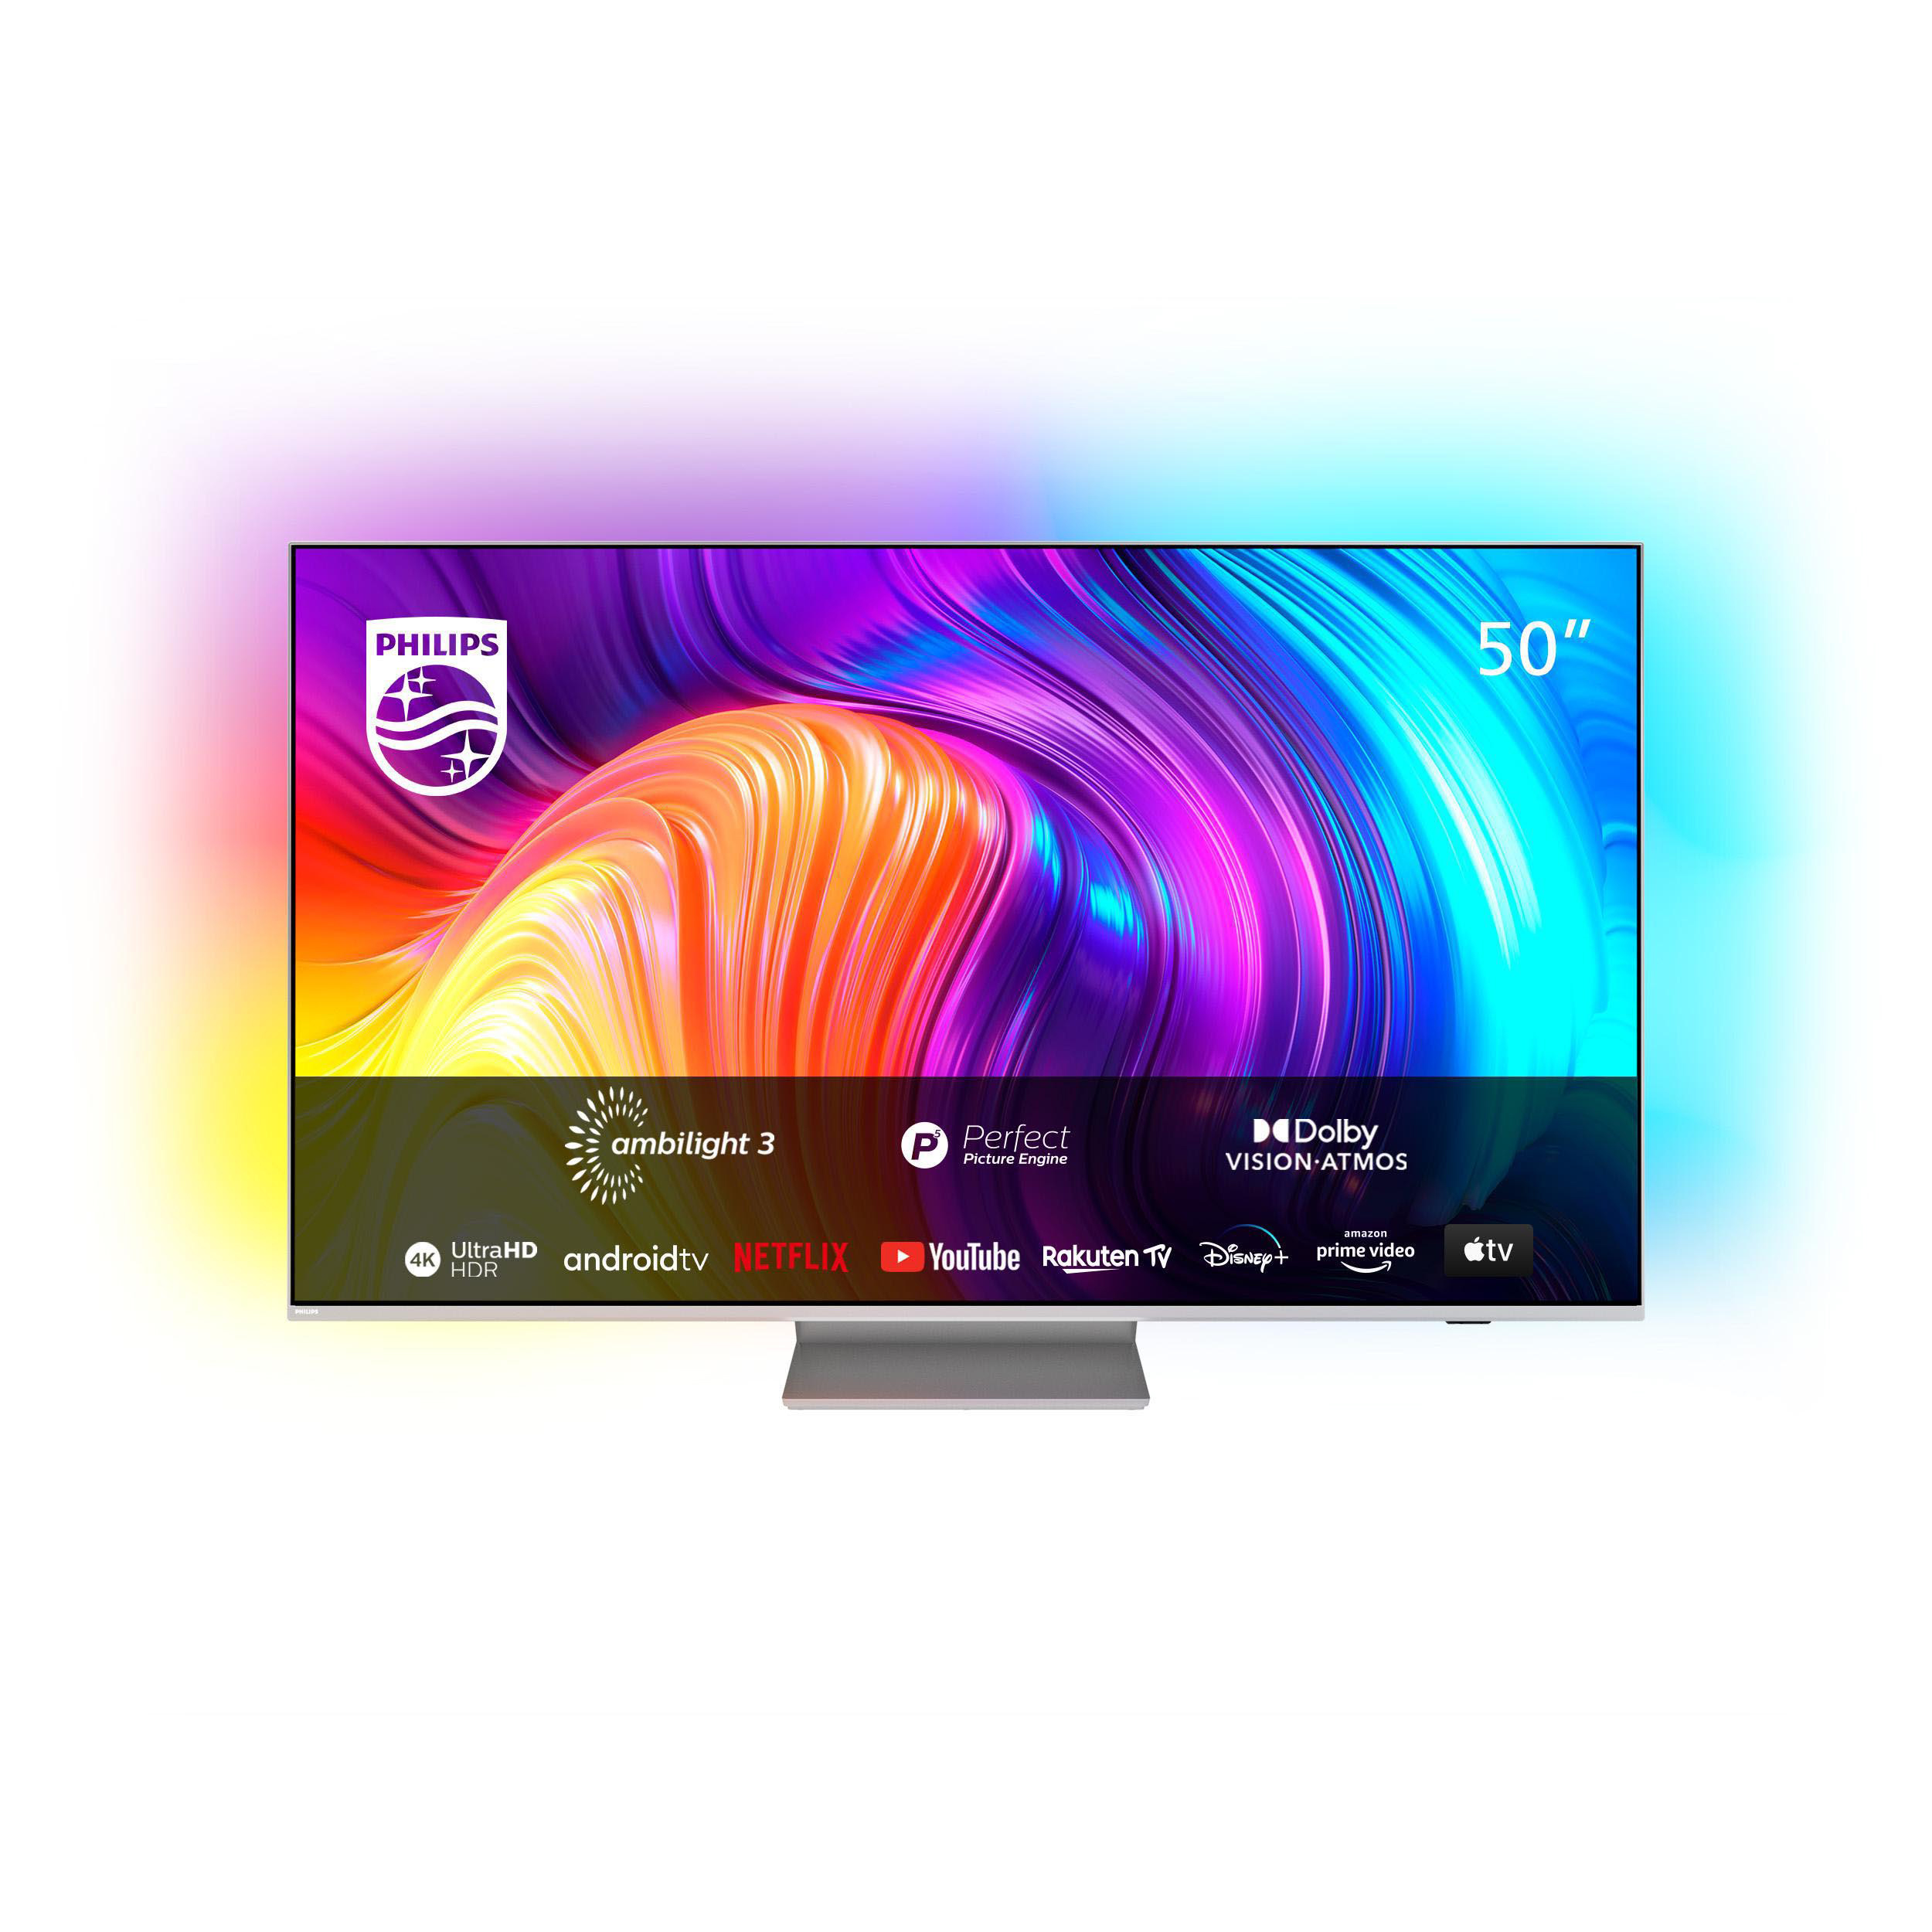 TV™ 126 50 cm, UHD SMART 4K, PHILIPS (Flat, (50 50PUS8837/12 4K (R)) TV 11 Ambilight, TV, Android / LED Zoll Zoll) UHD The One